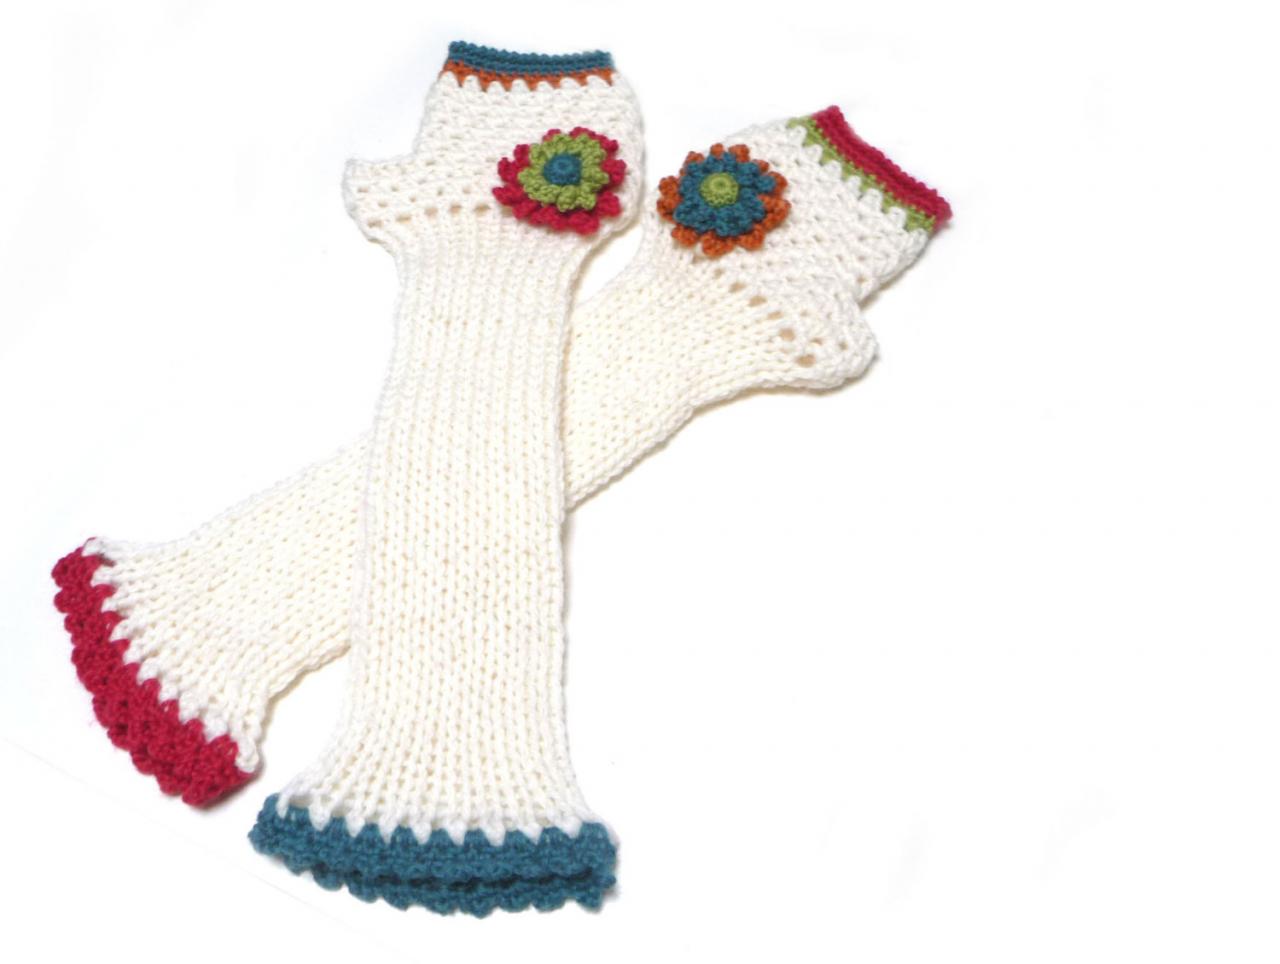 White Knit Long Fingerless Gloves, Crochet Winter No Finger Mittens, Mitts, Arm Warmers, Wrist Warmers, For Women With Flowers, Mom Gift